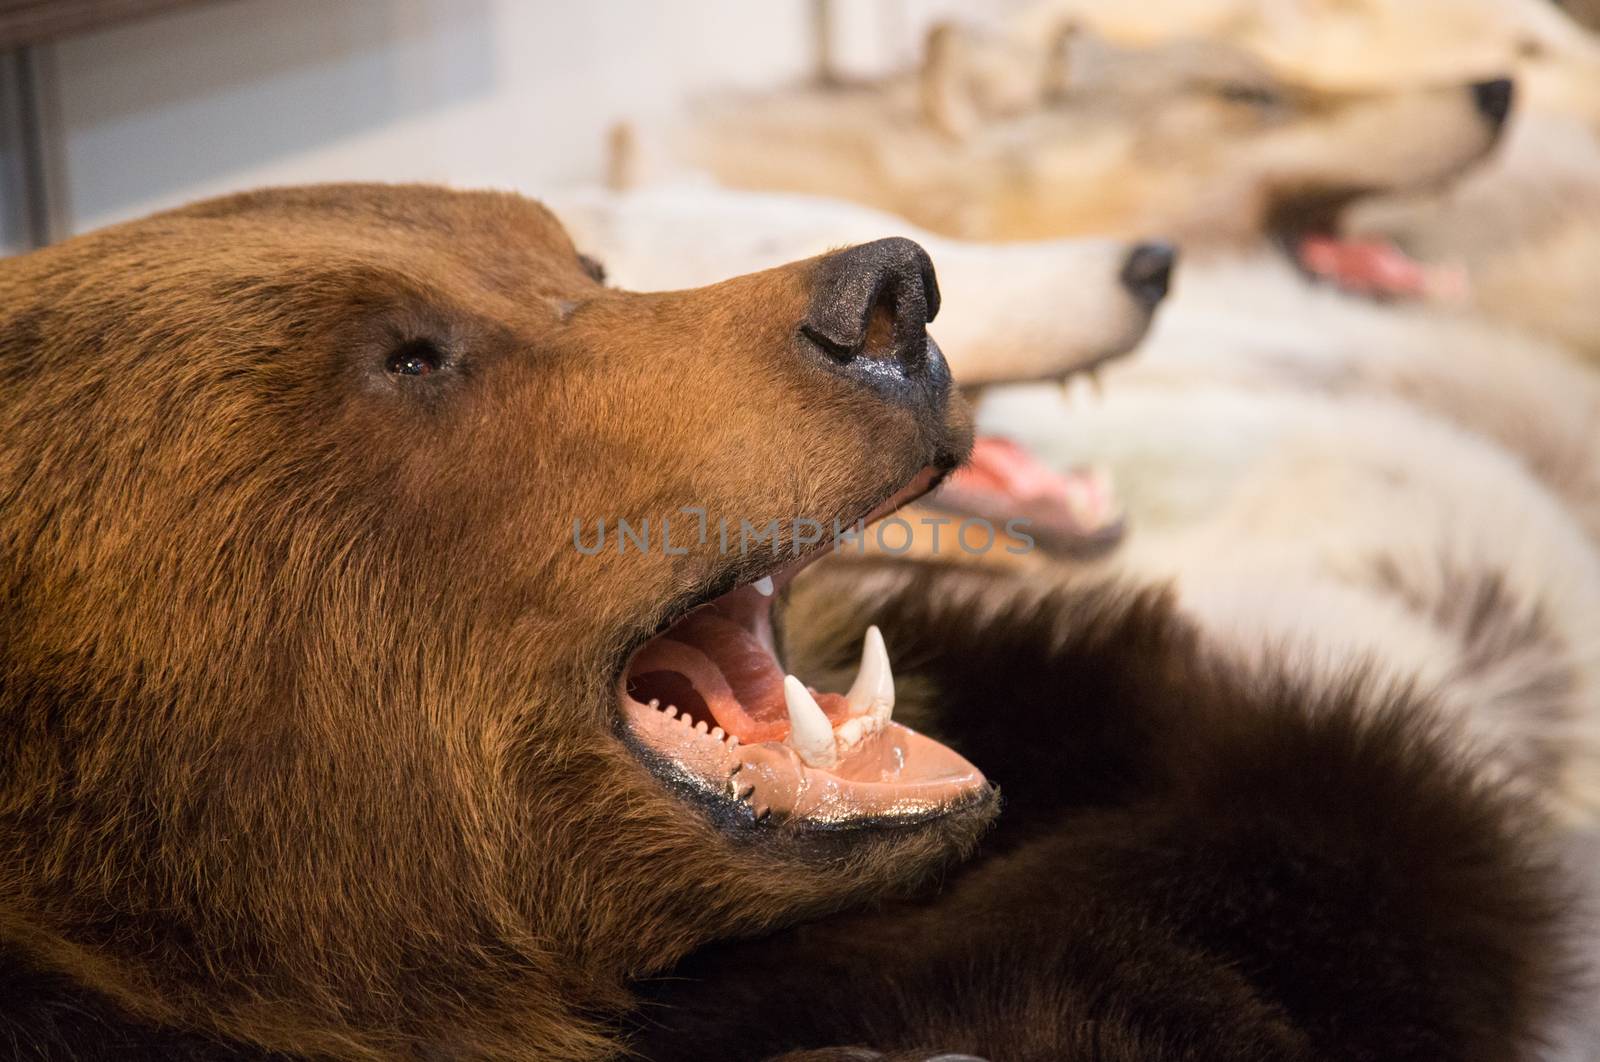 Bear's head with bared teeth by L86